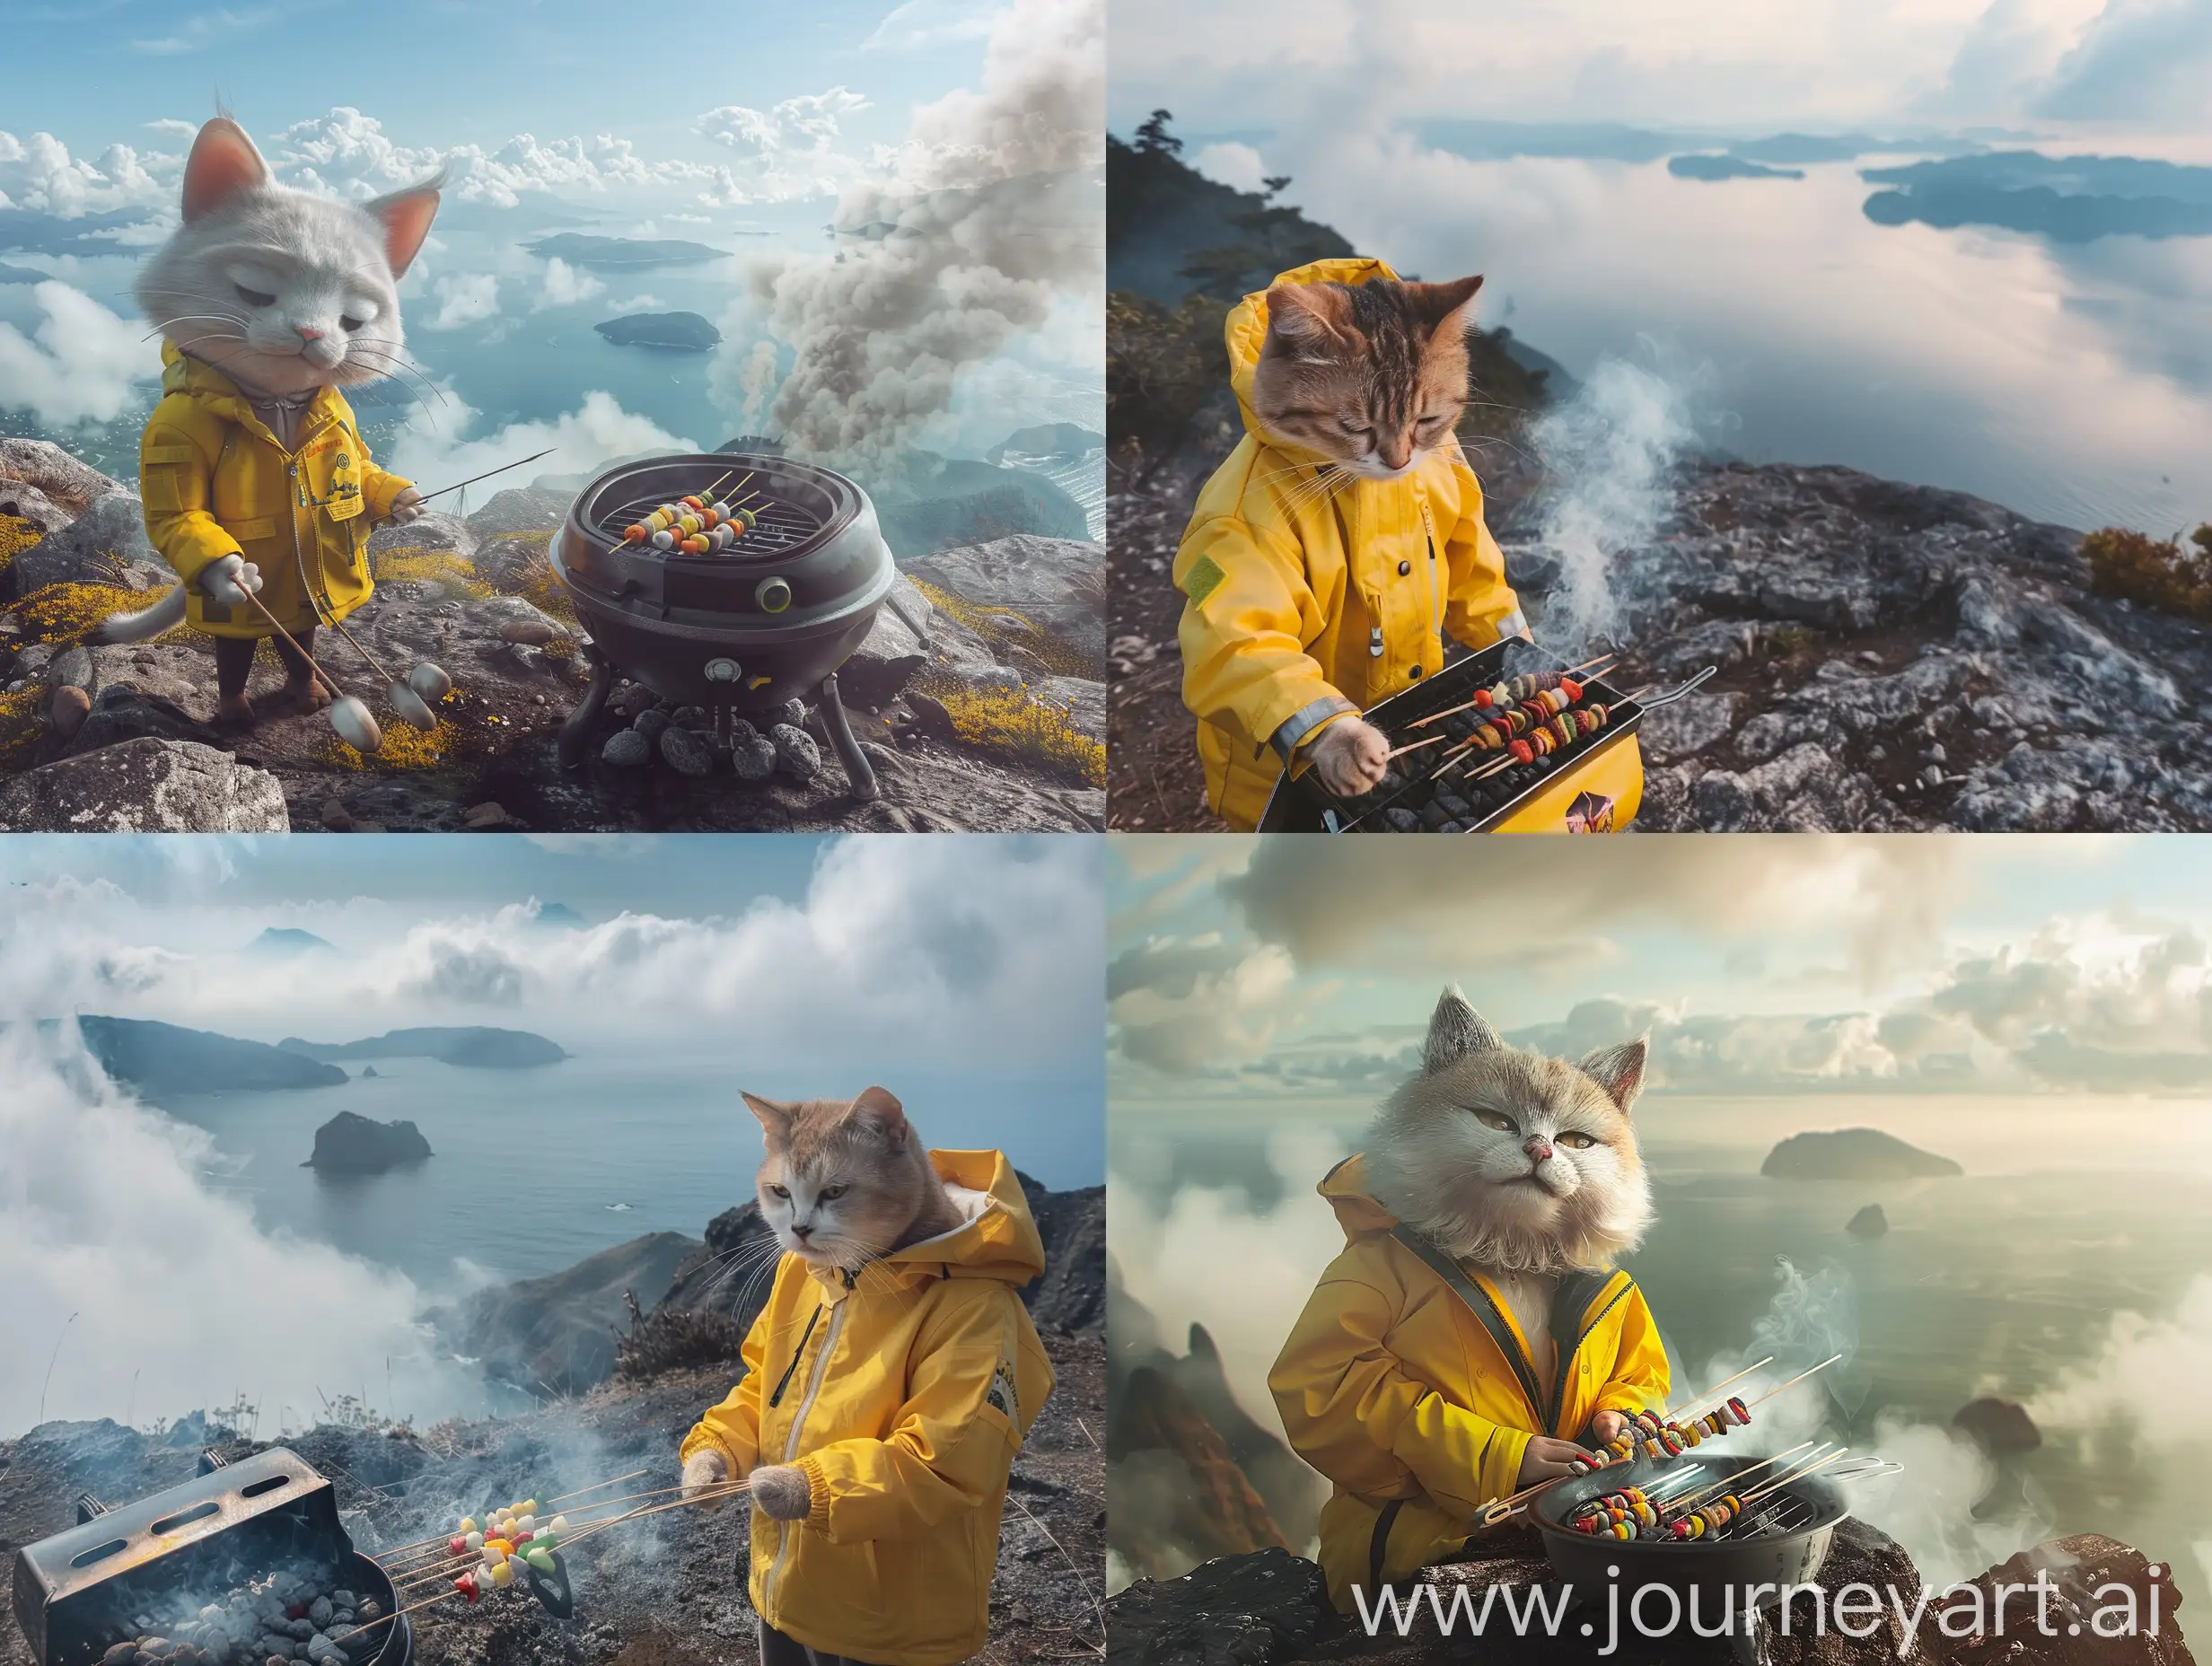 cute cat wearing a yellow outdoor jacket is grilling skewers on the top of a mountain. The skewers are placed on a charcoal grill. Smoke from the barbecue is rising. Behind it is a calm sea, with a small island in the distance and clouds and mist in the sky